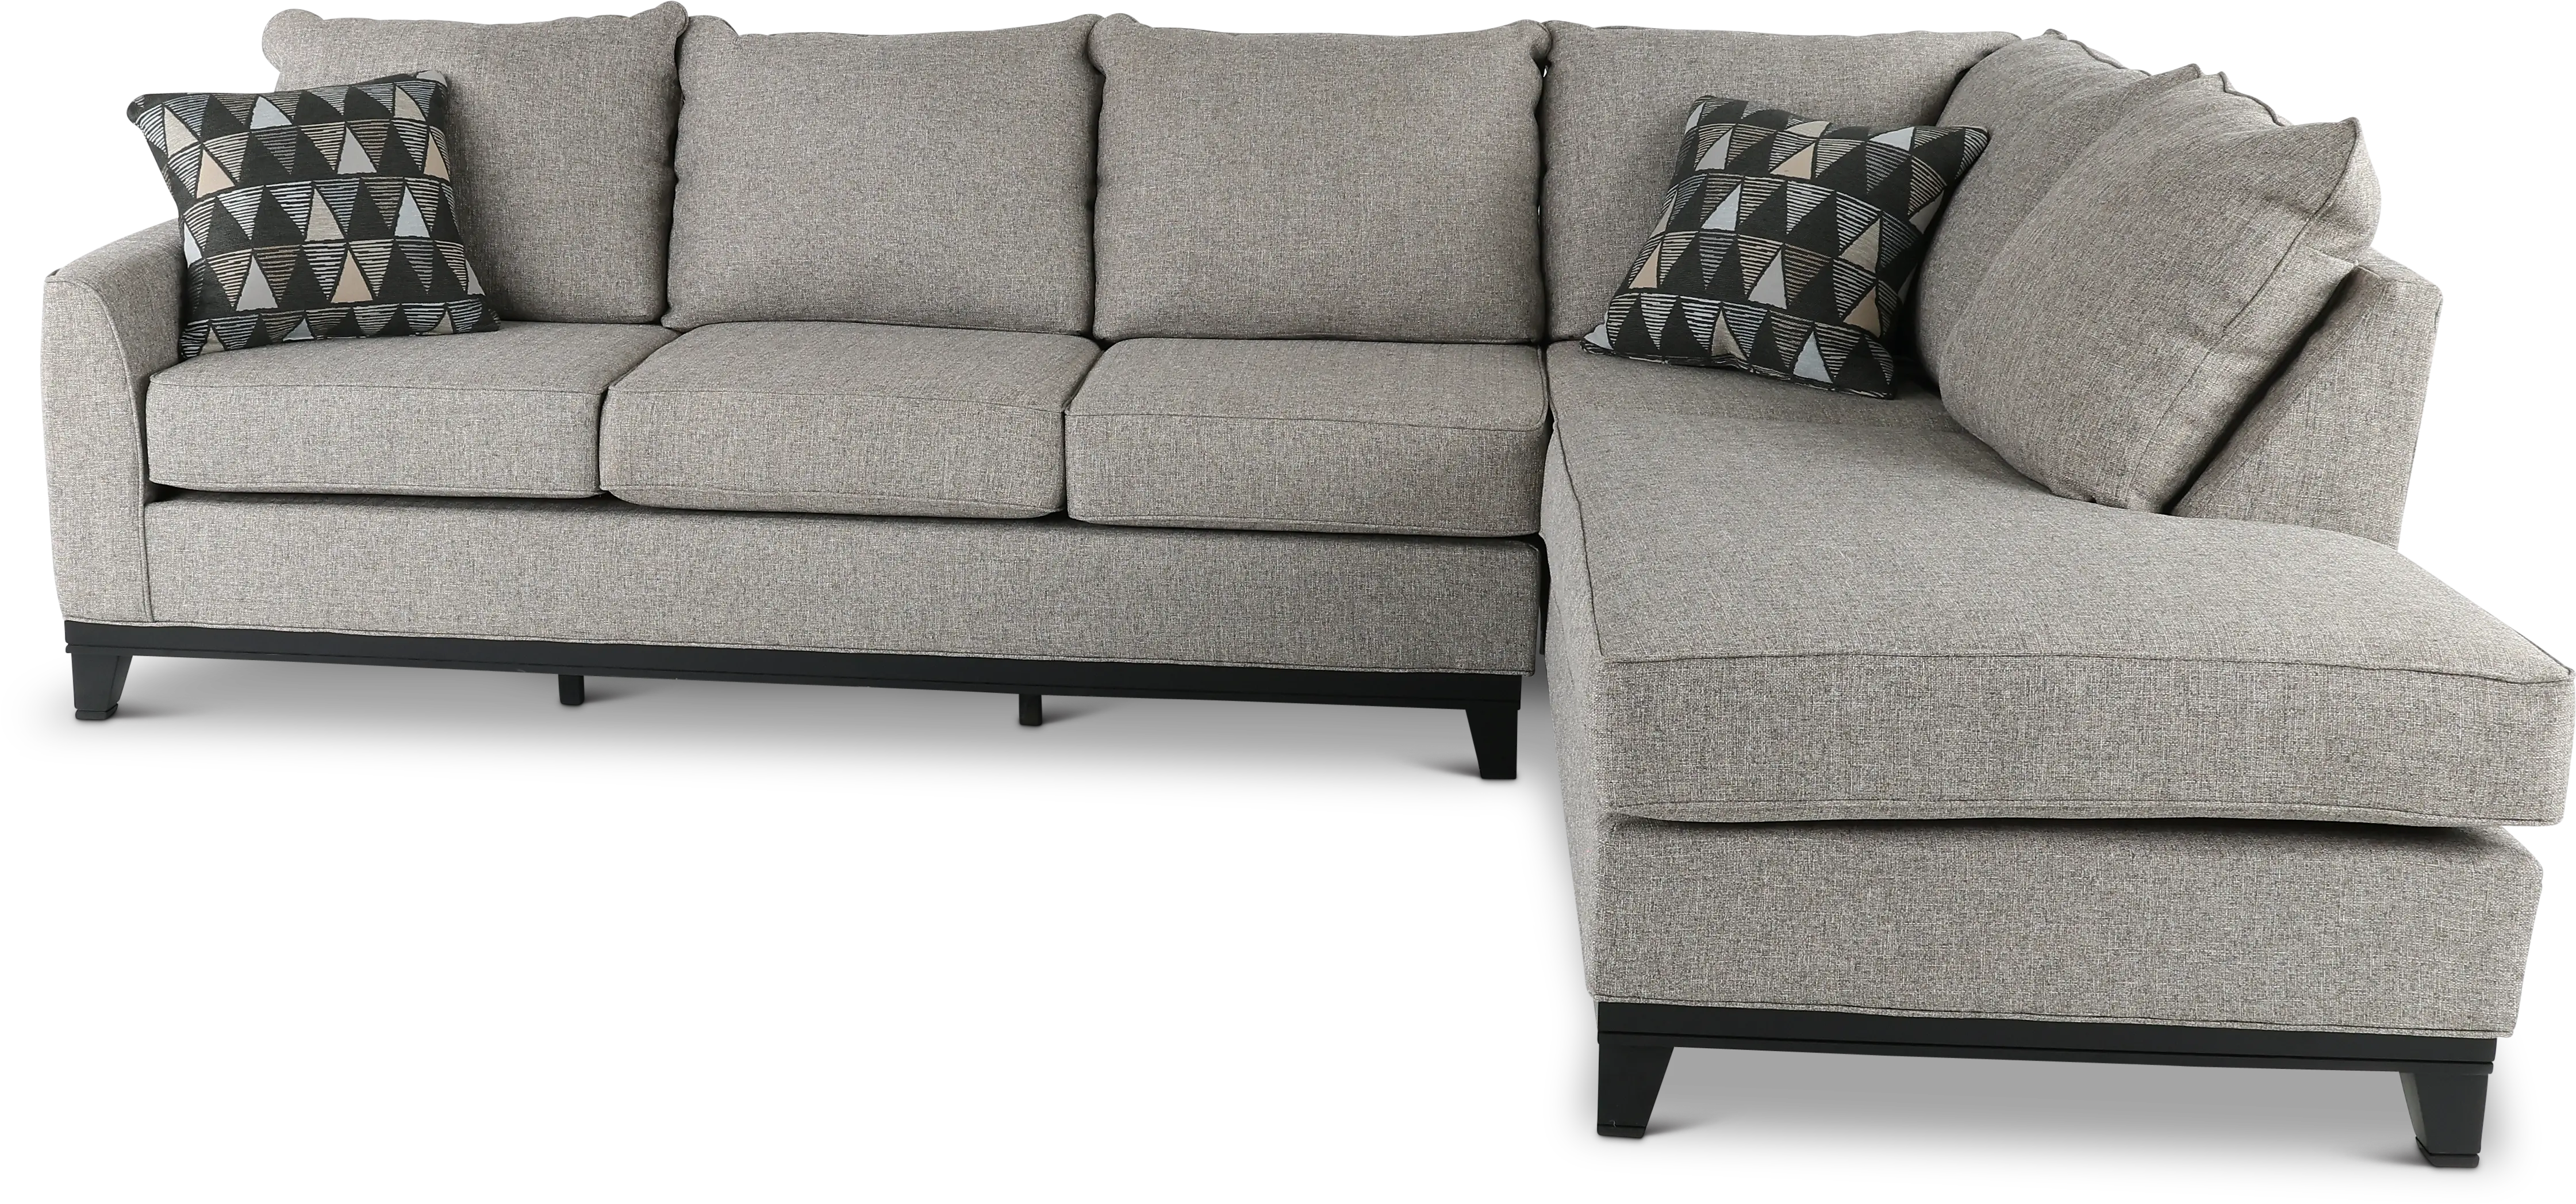 Emerson Gray 2 Piece Sectional Rc Willey